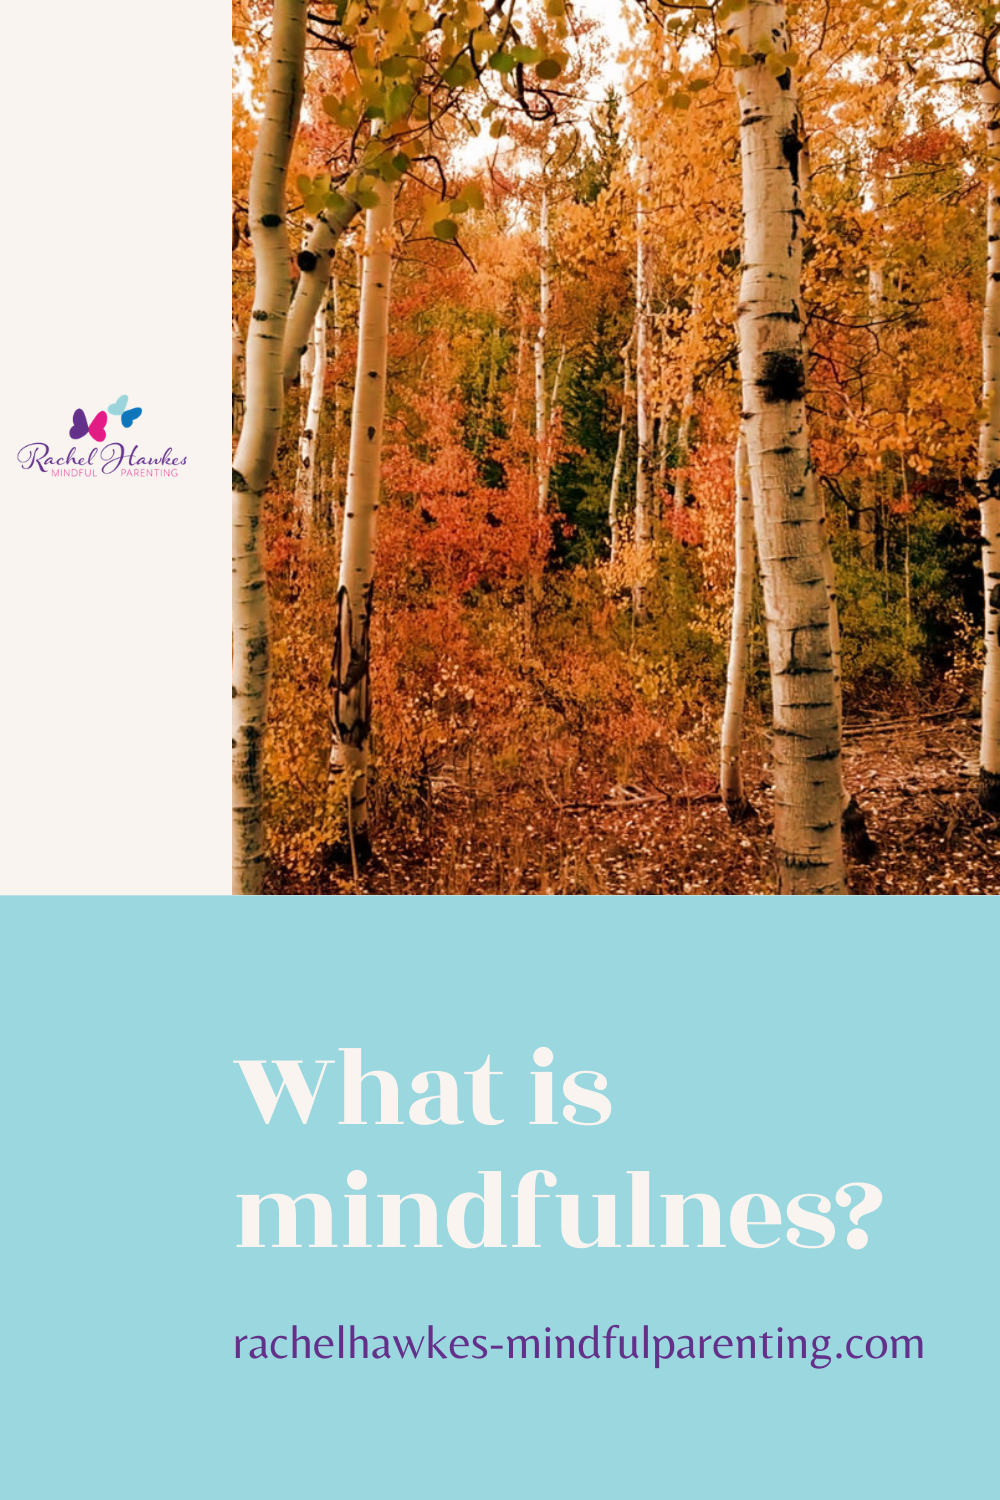 What is mindfulness?